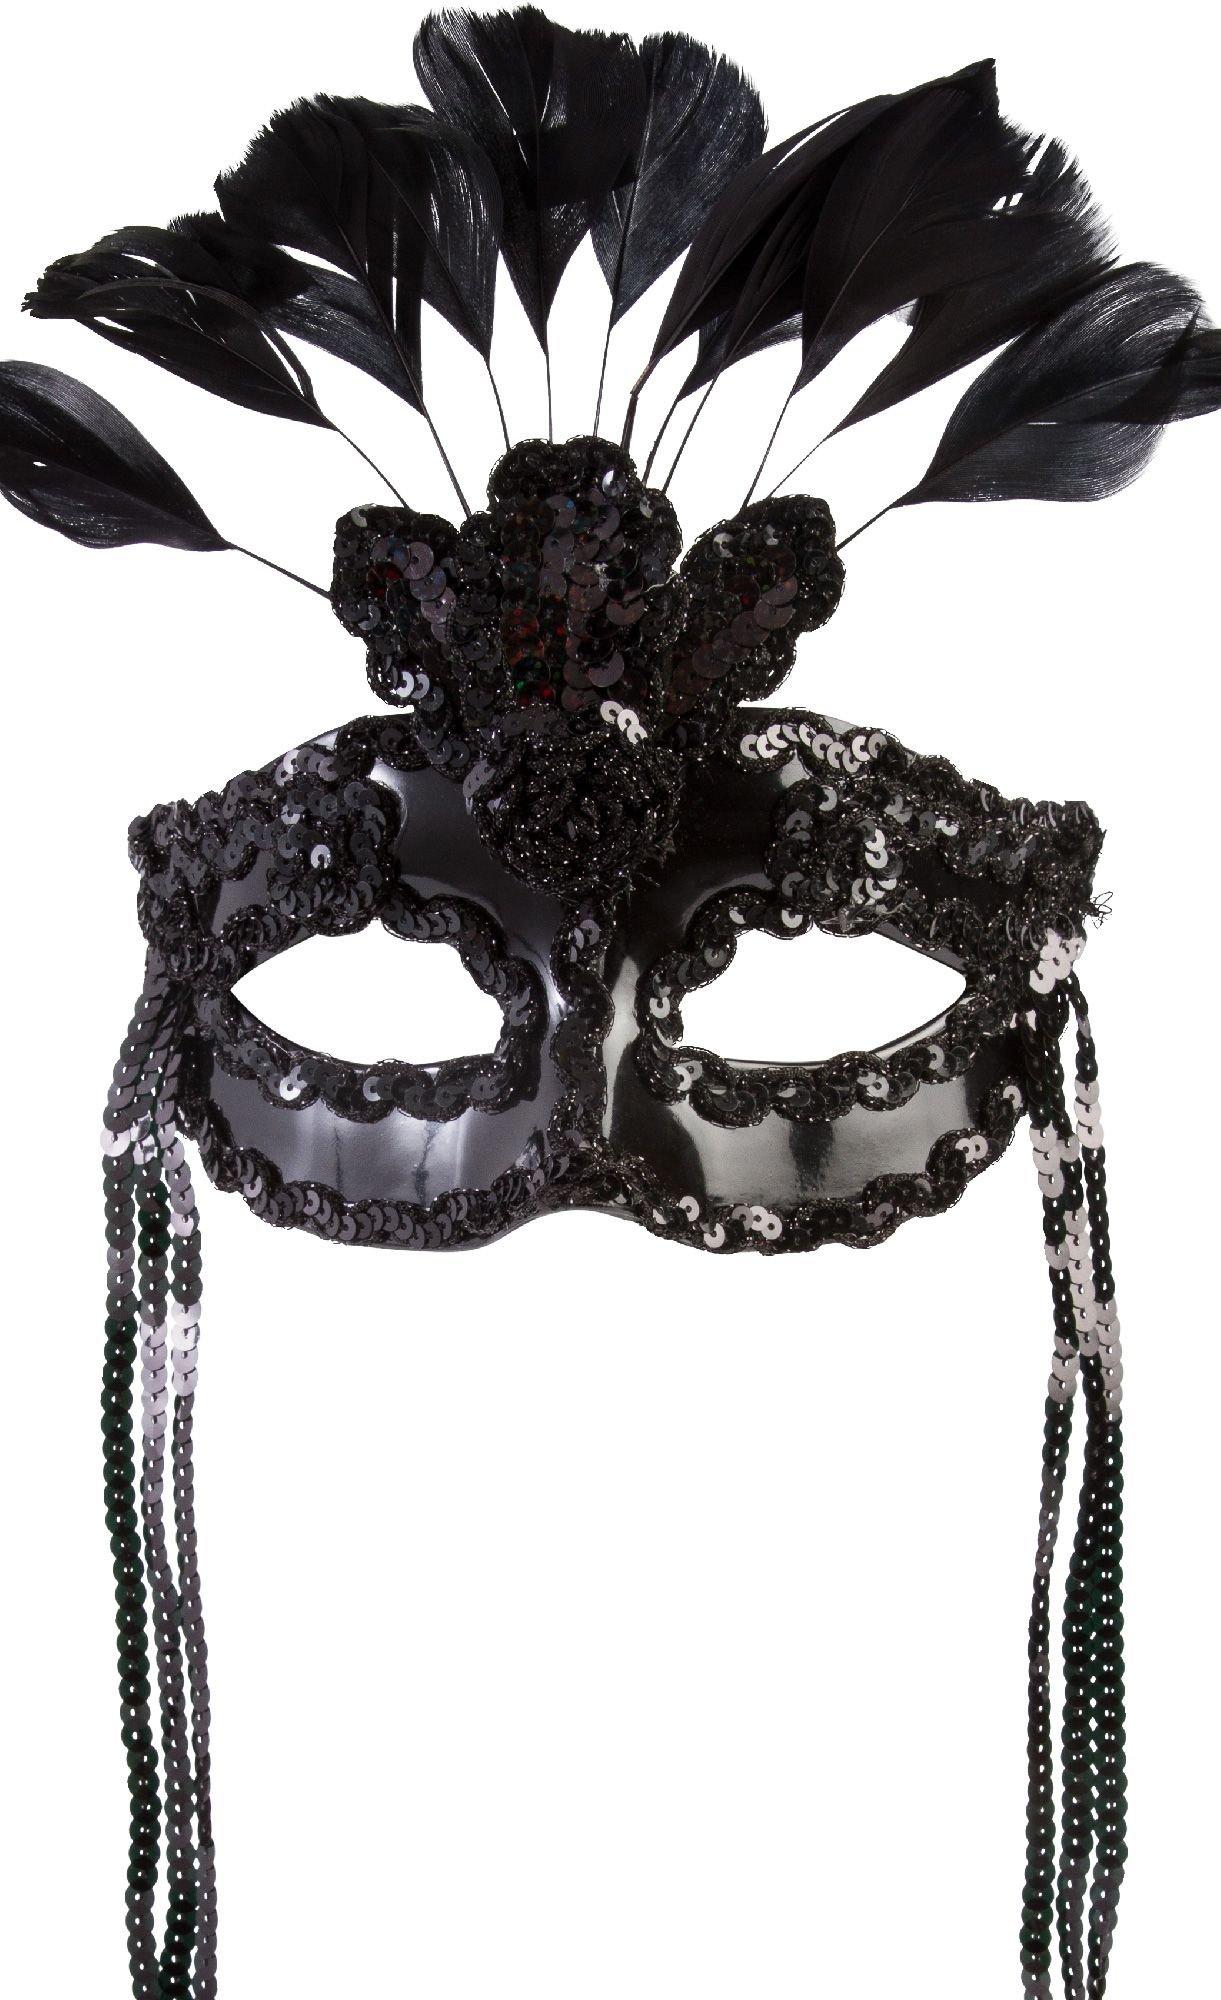 Masquerade Party Mask,black, White Lace,theme Party Cocktail Party